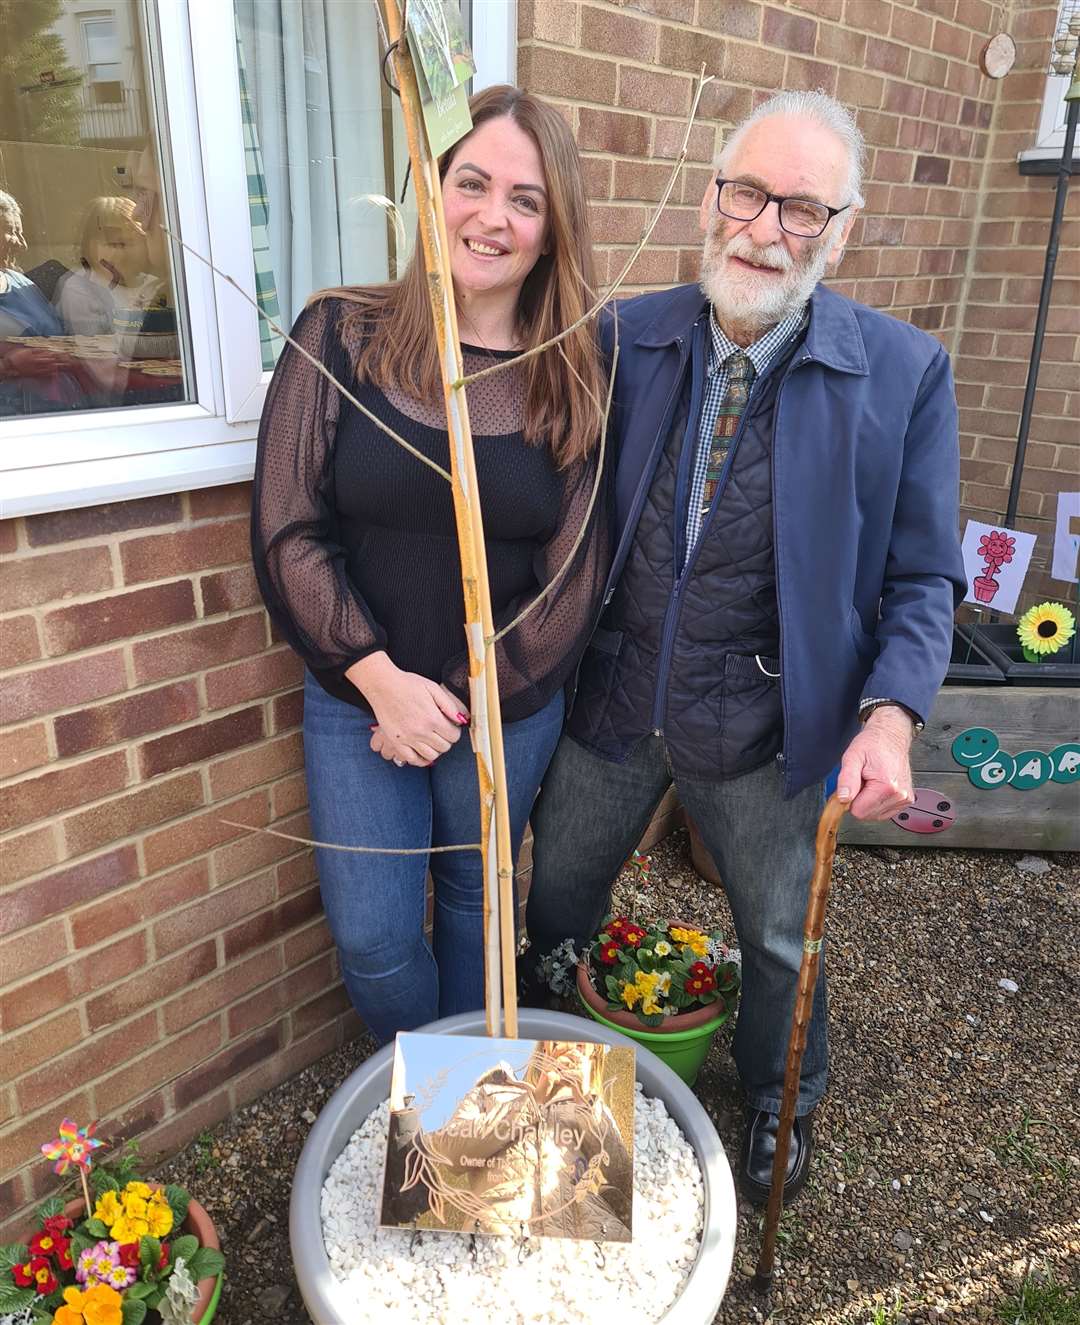 New playgroup leader Kirsty Barden with Jean's husband Robert. Photo: Kirsty Barden